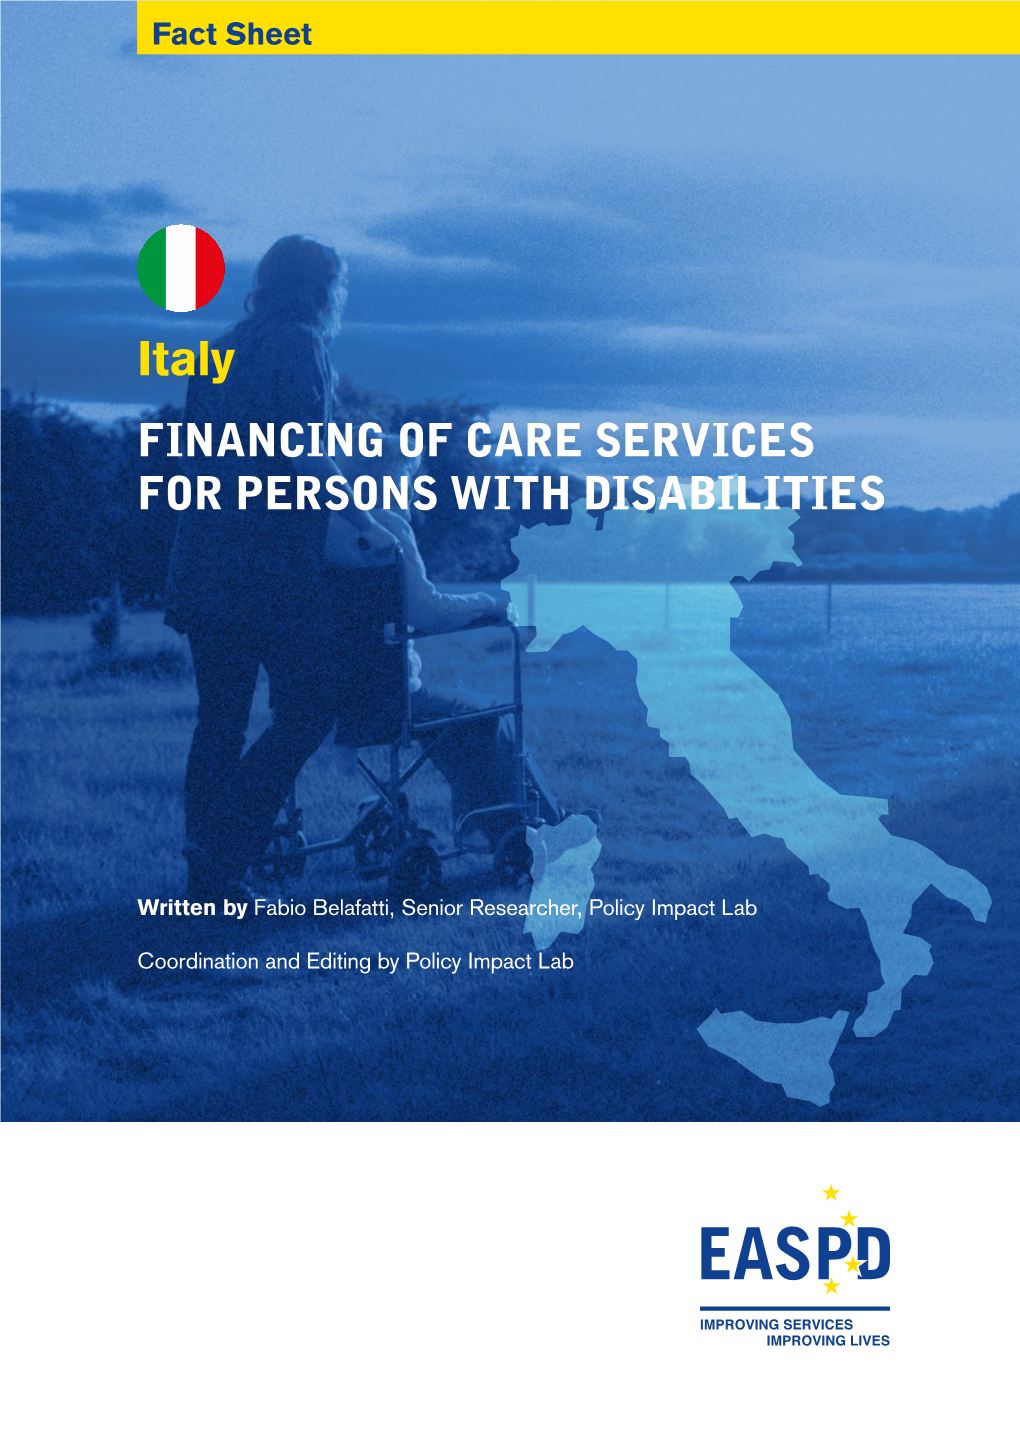 Financing of Care Services for Persons with Disabilities